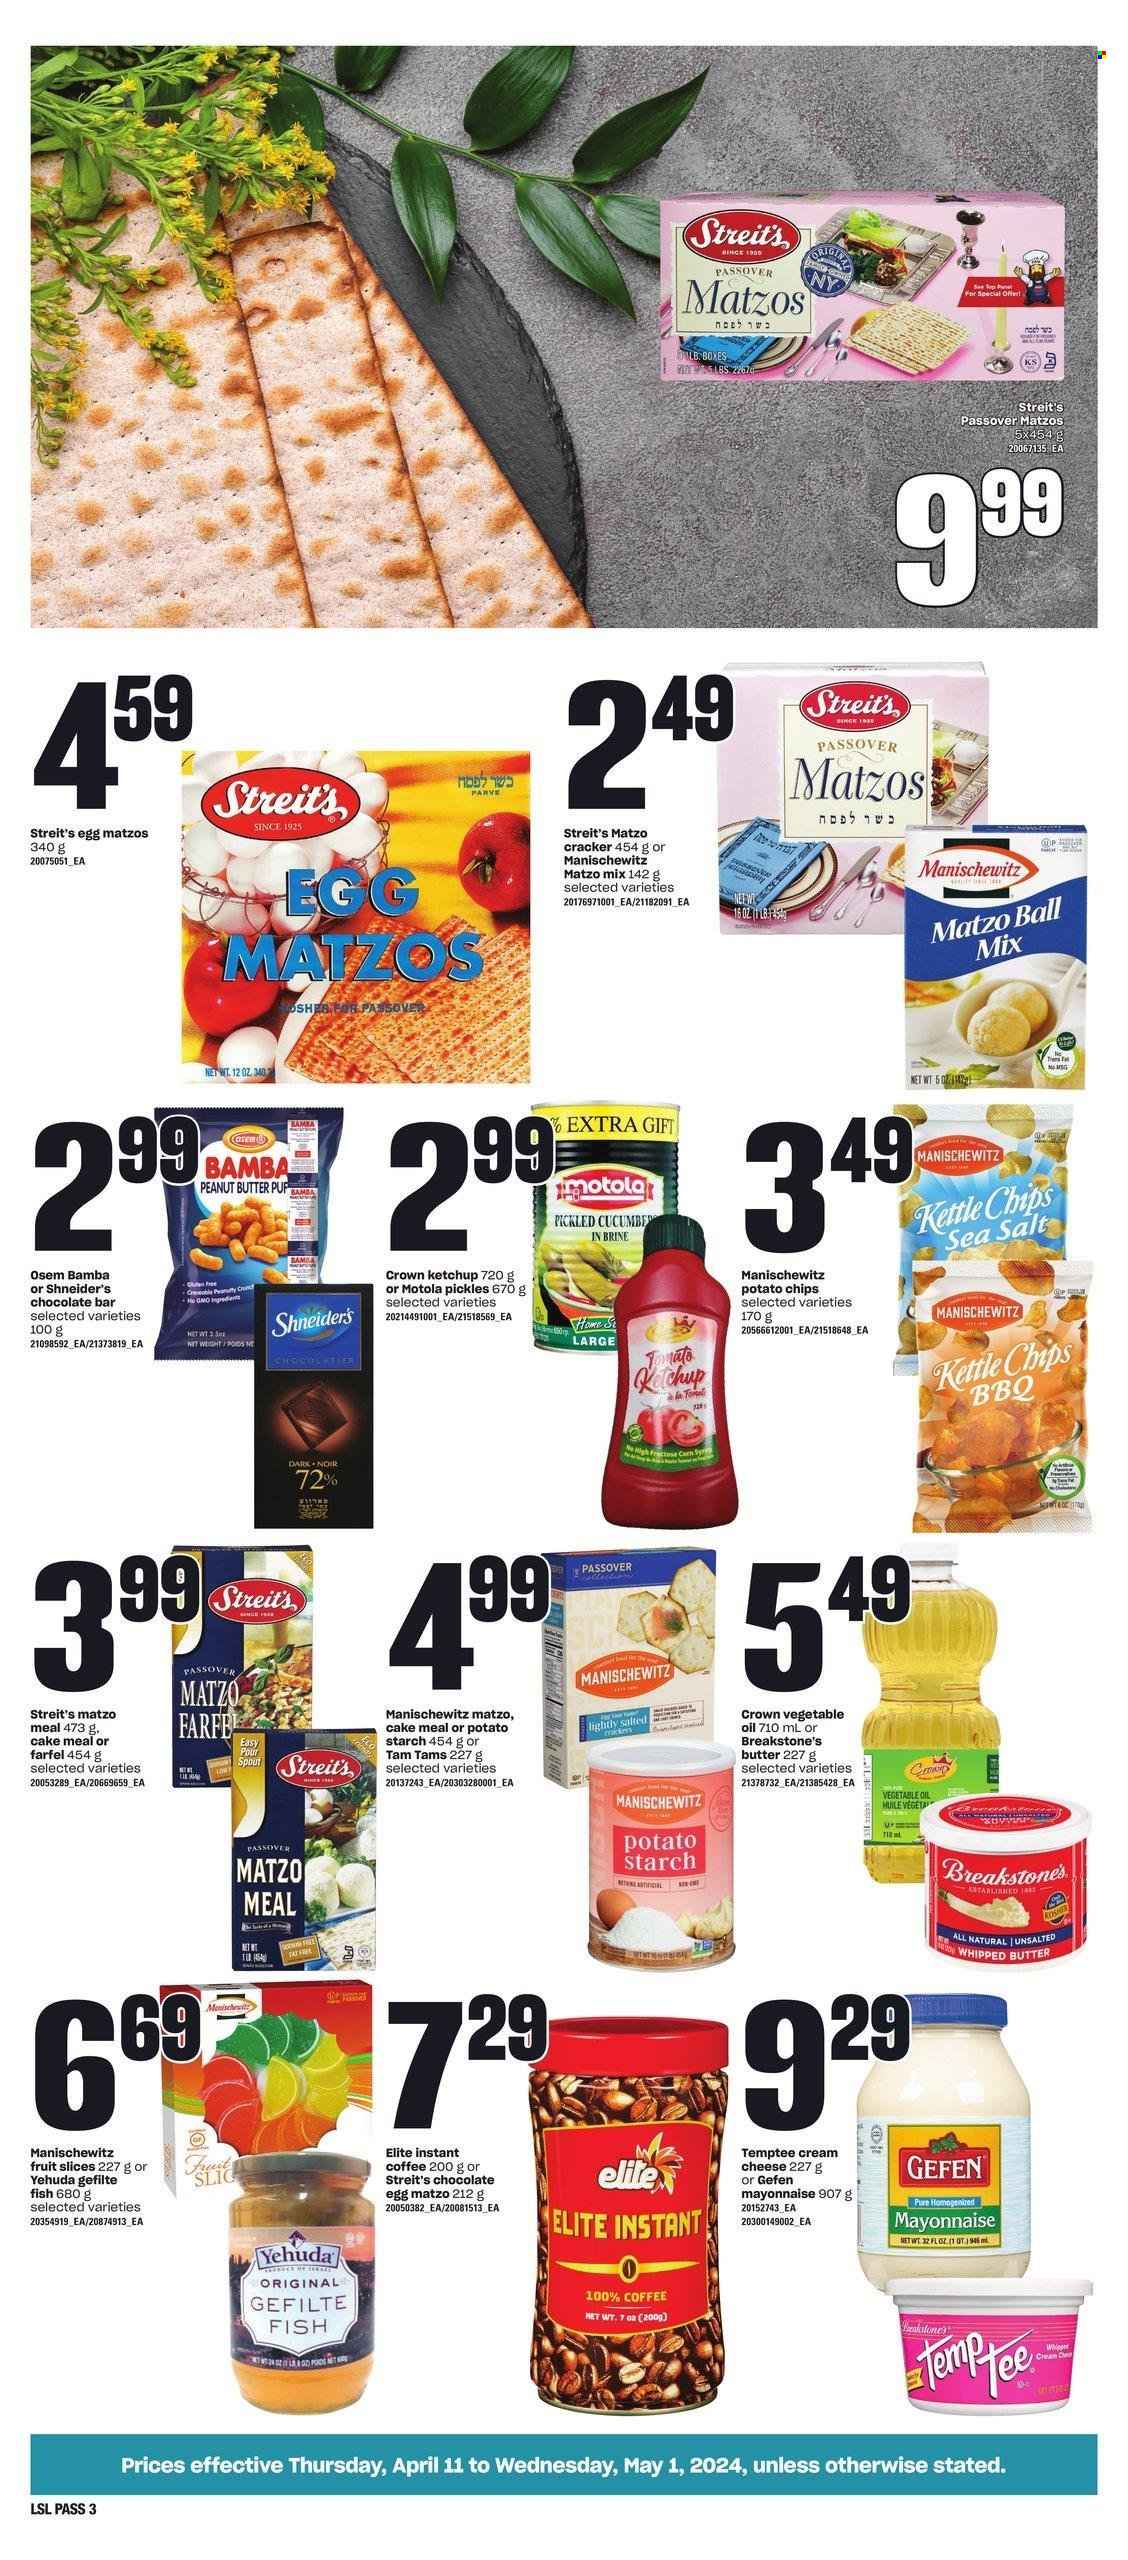 thumbnail - Loblaws Flyer - April 11, 2024 - May 01, 2024 - Sales products - matzo bread, corn, fish, cream cheese, whipped butter, mayonnaise, crackers, chocolate egg, fruit slices, chocolate bar, potato chips, Bamba, Kettle chips, matzo meal, starch, potato starch, pickles, pickled vegetables, ketchup, vegetable oil, oil, peanut butter, coffee, instant coffee. Page 3.